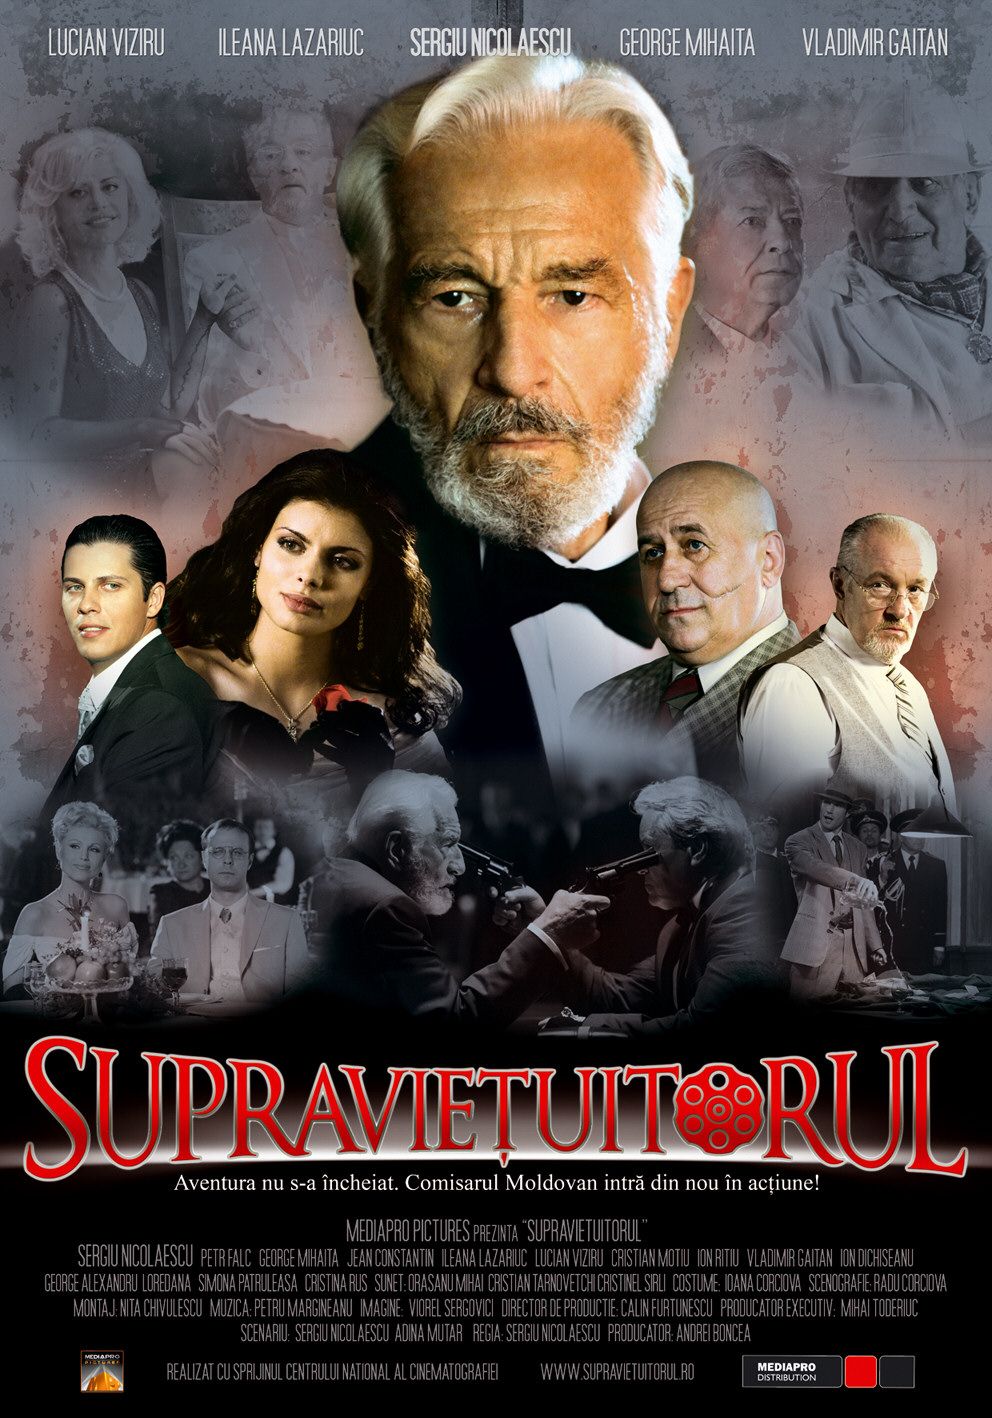 Extra Large Movie Poster Image for Supravietuitorul (#2 of 2)